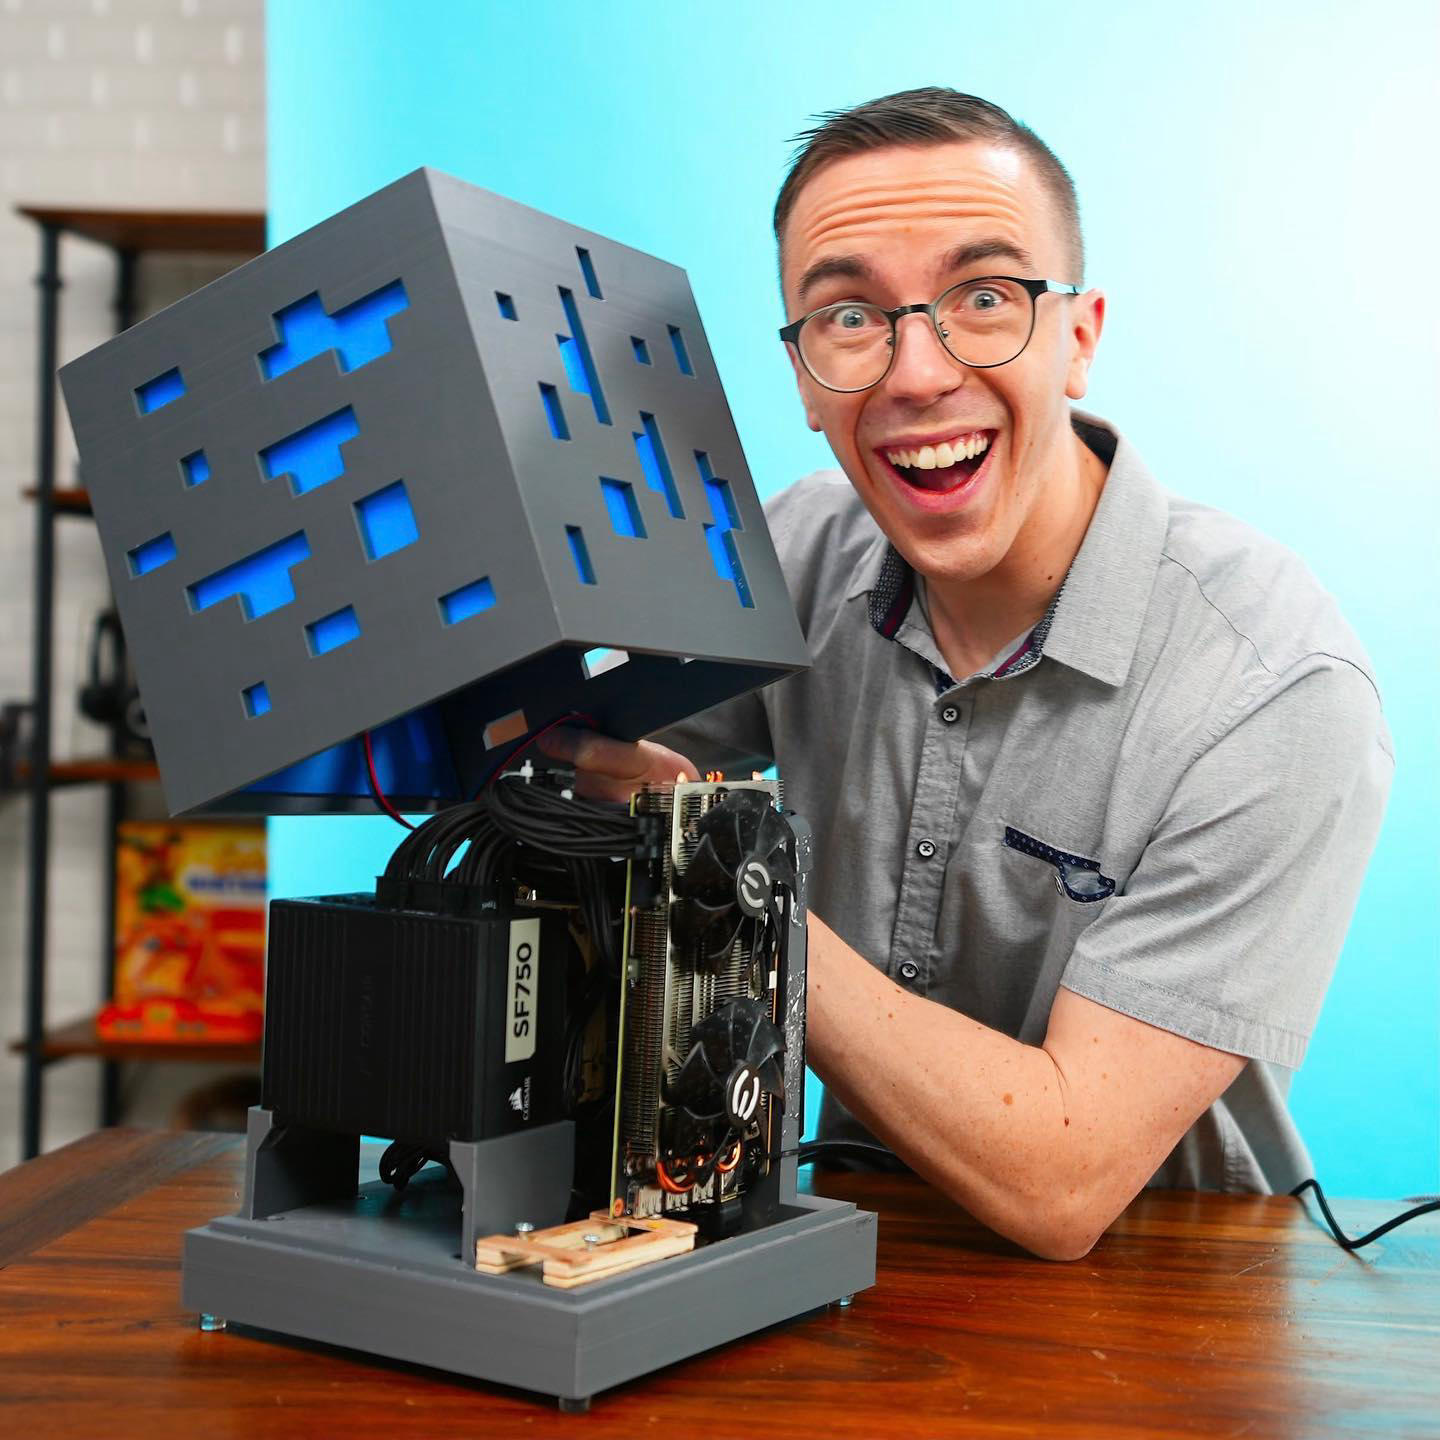 image  1 Austin Evans - We built a gaming PC in a fully 3D printed cube